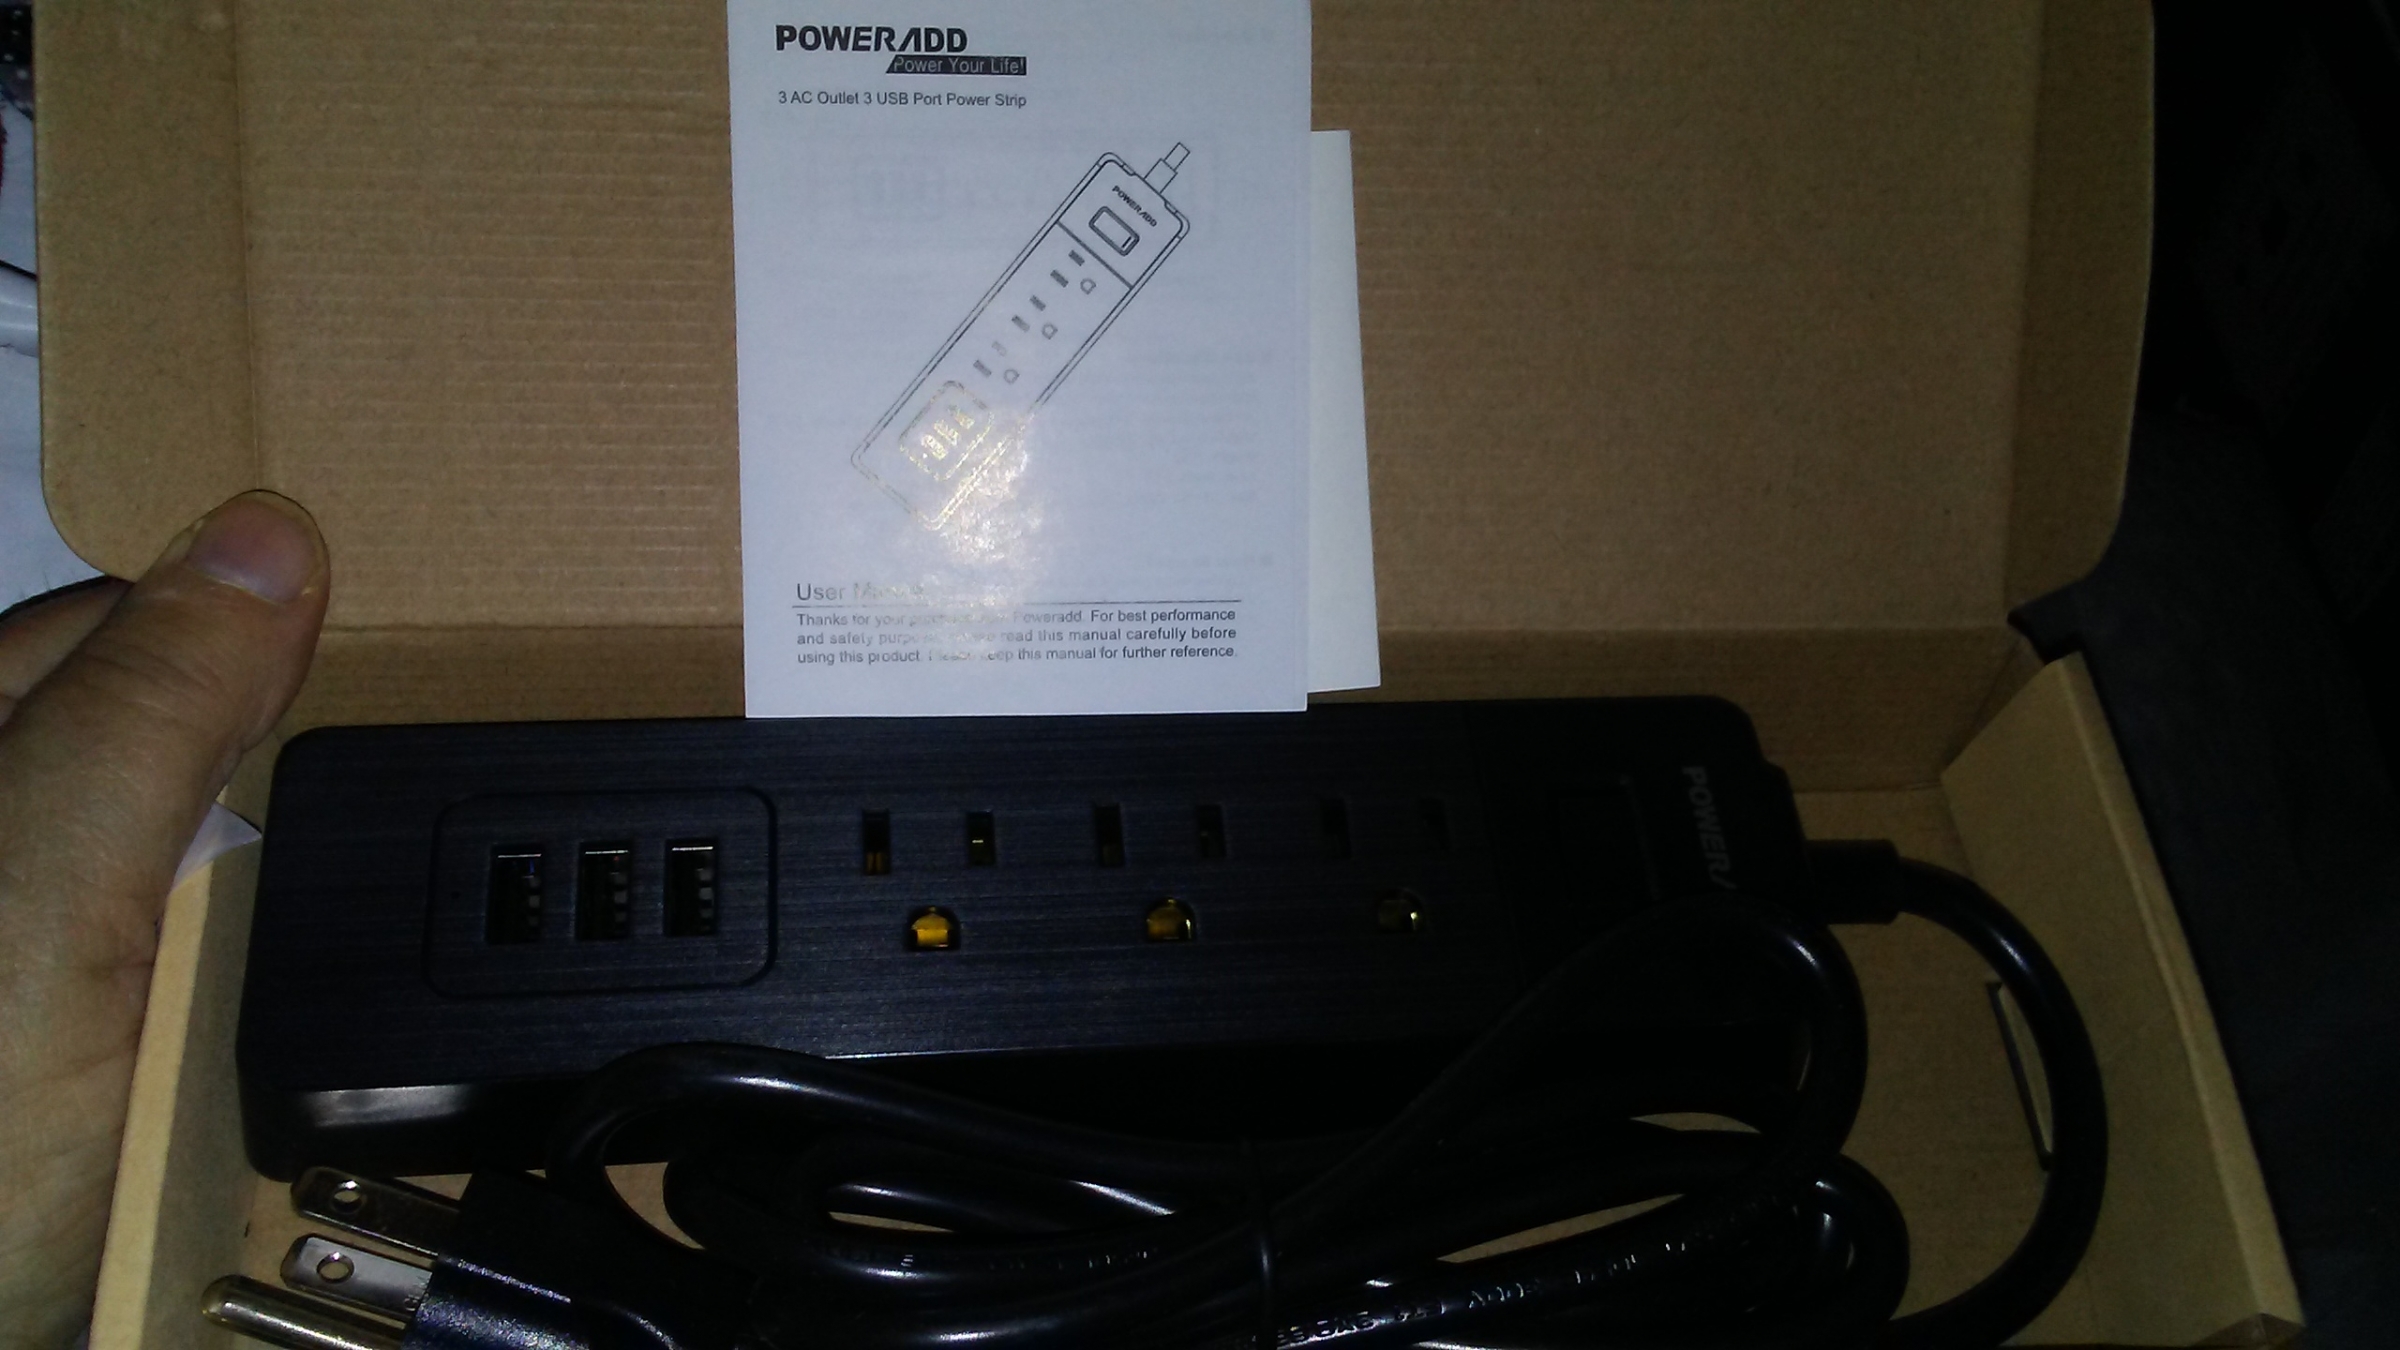 You can never have too many surge protectors, power strips, or cellphone chargers